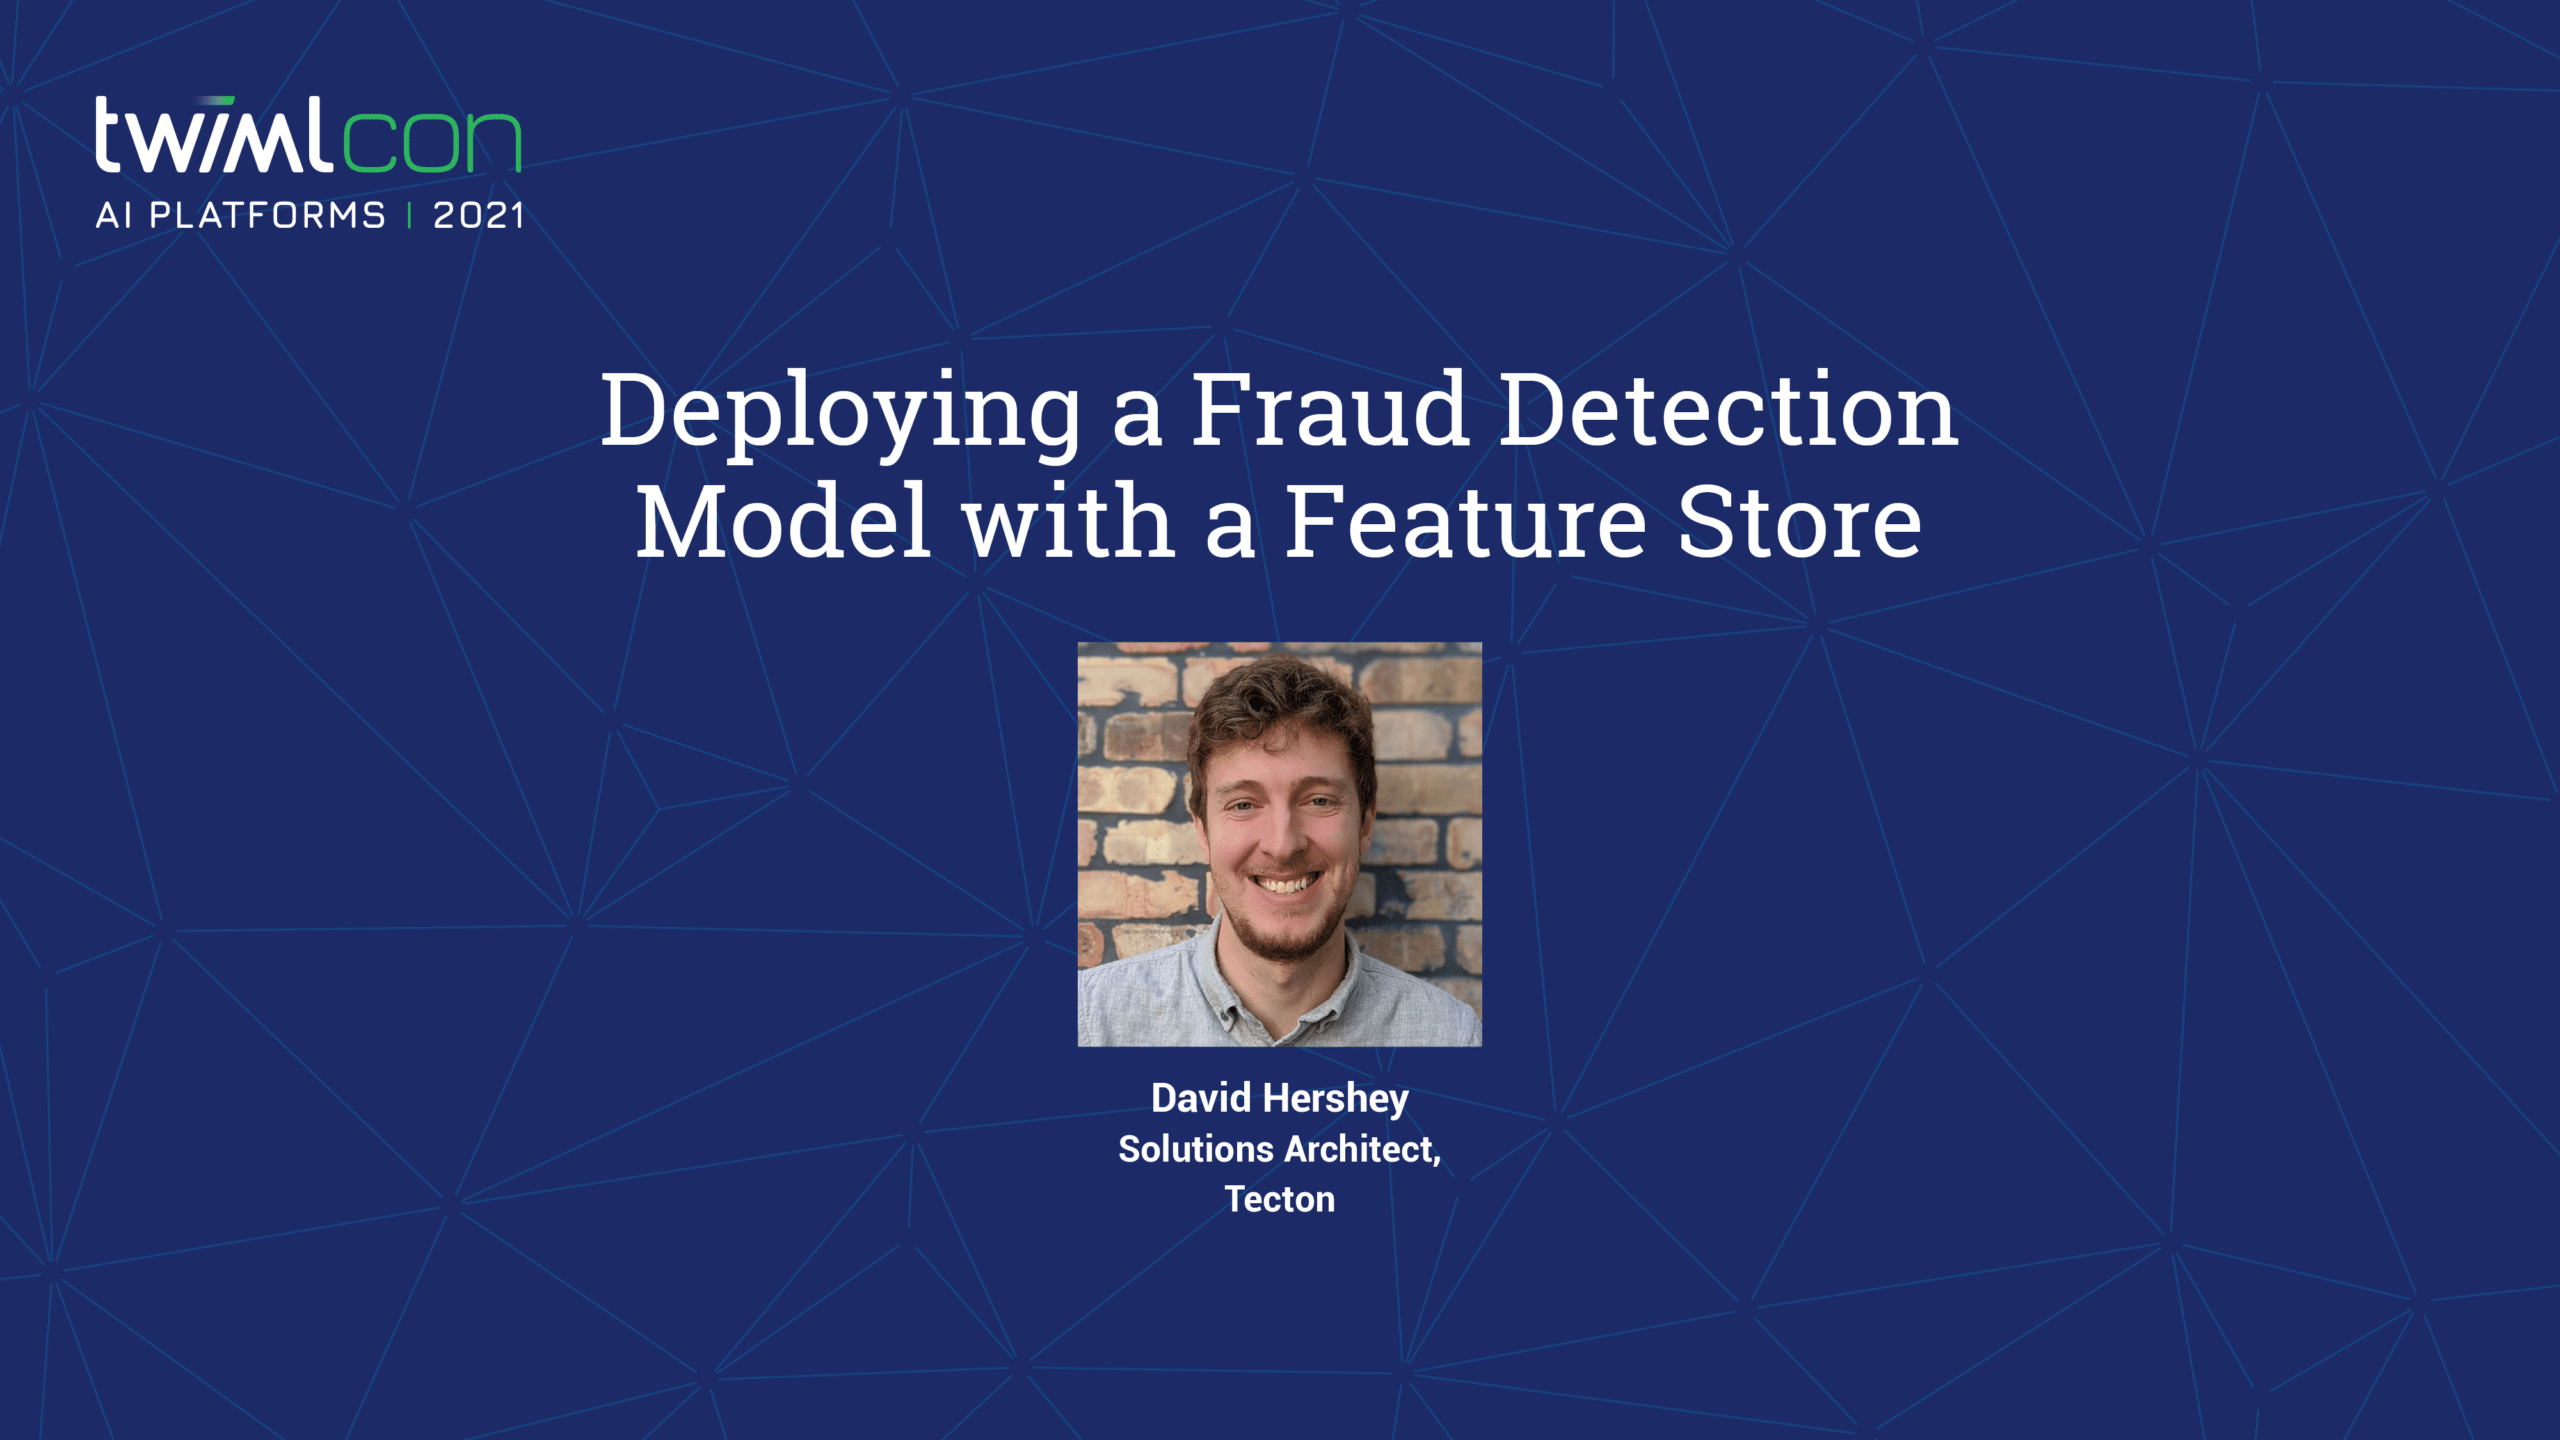 Deploying a Fraud Detection Model with a Feature Store